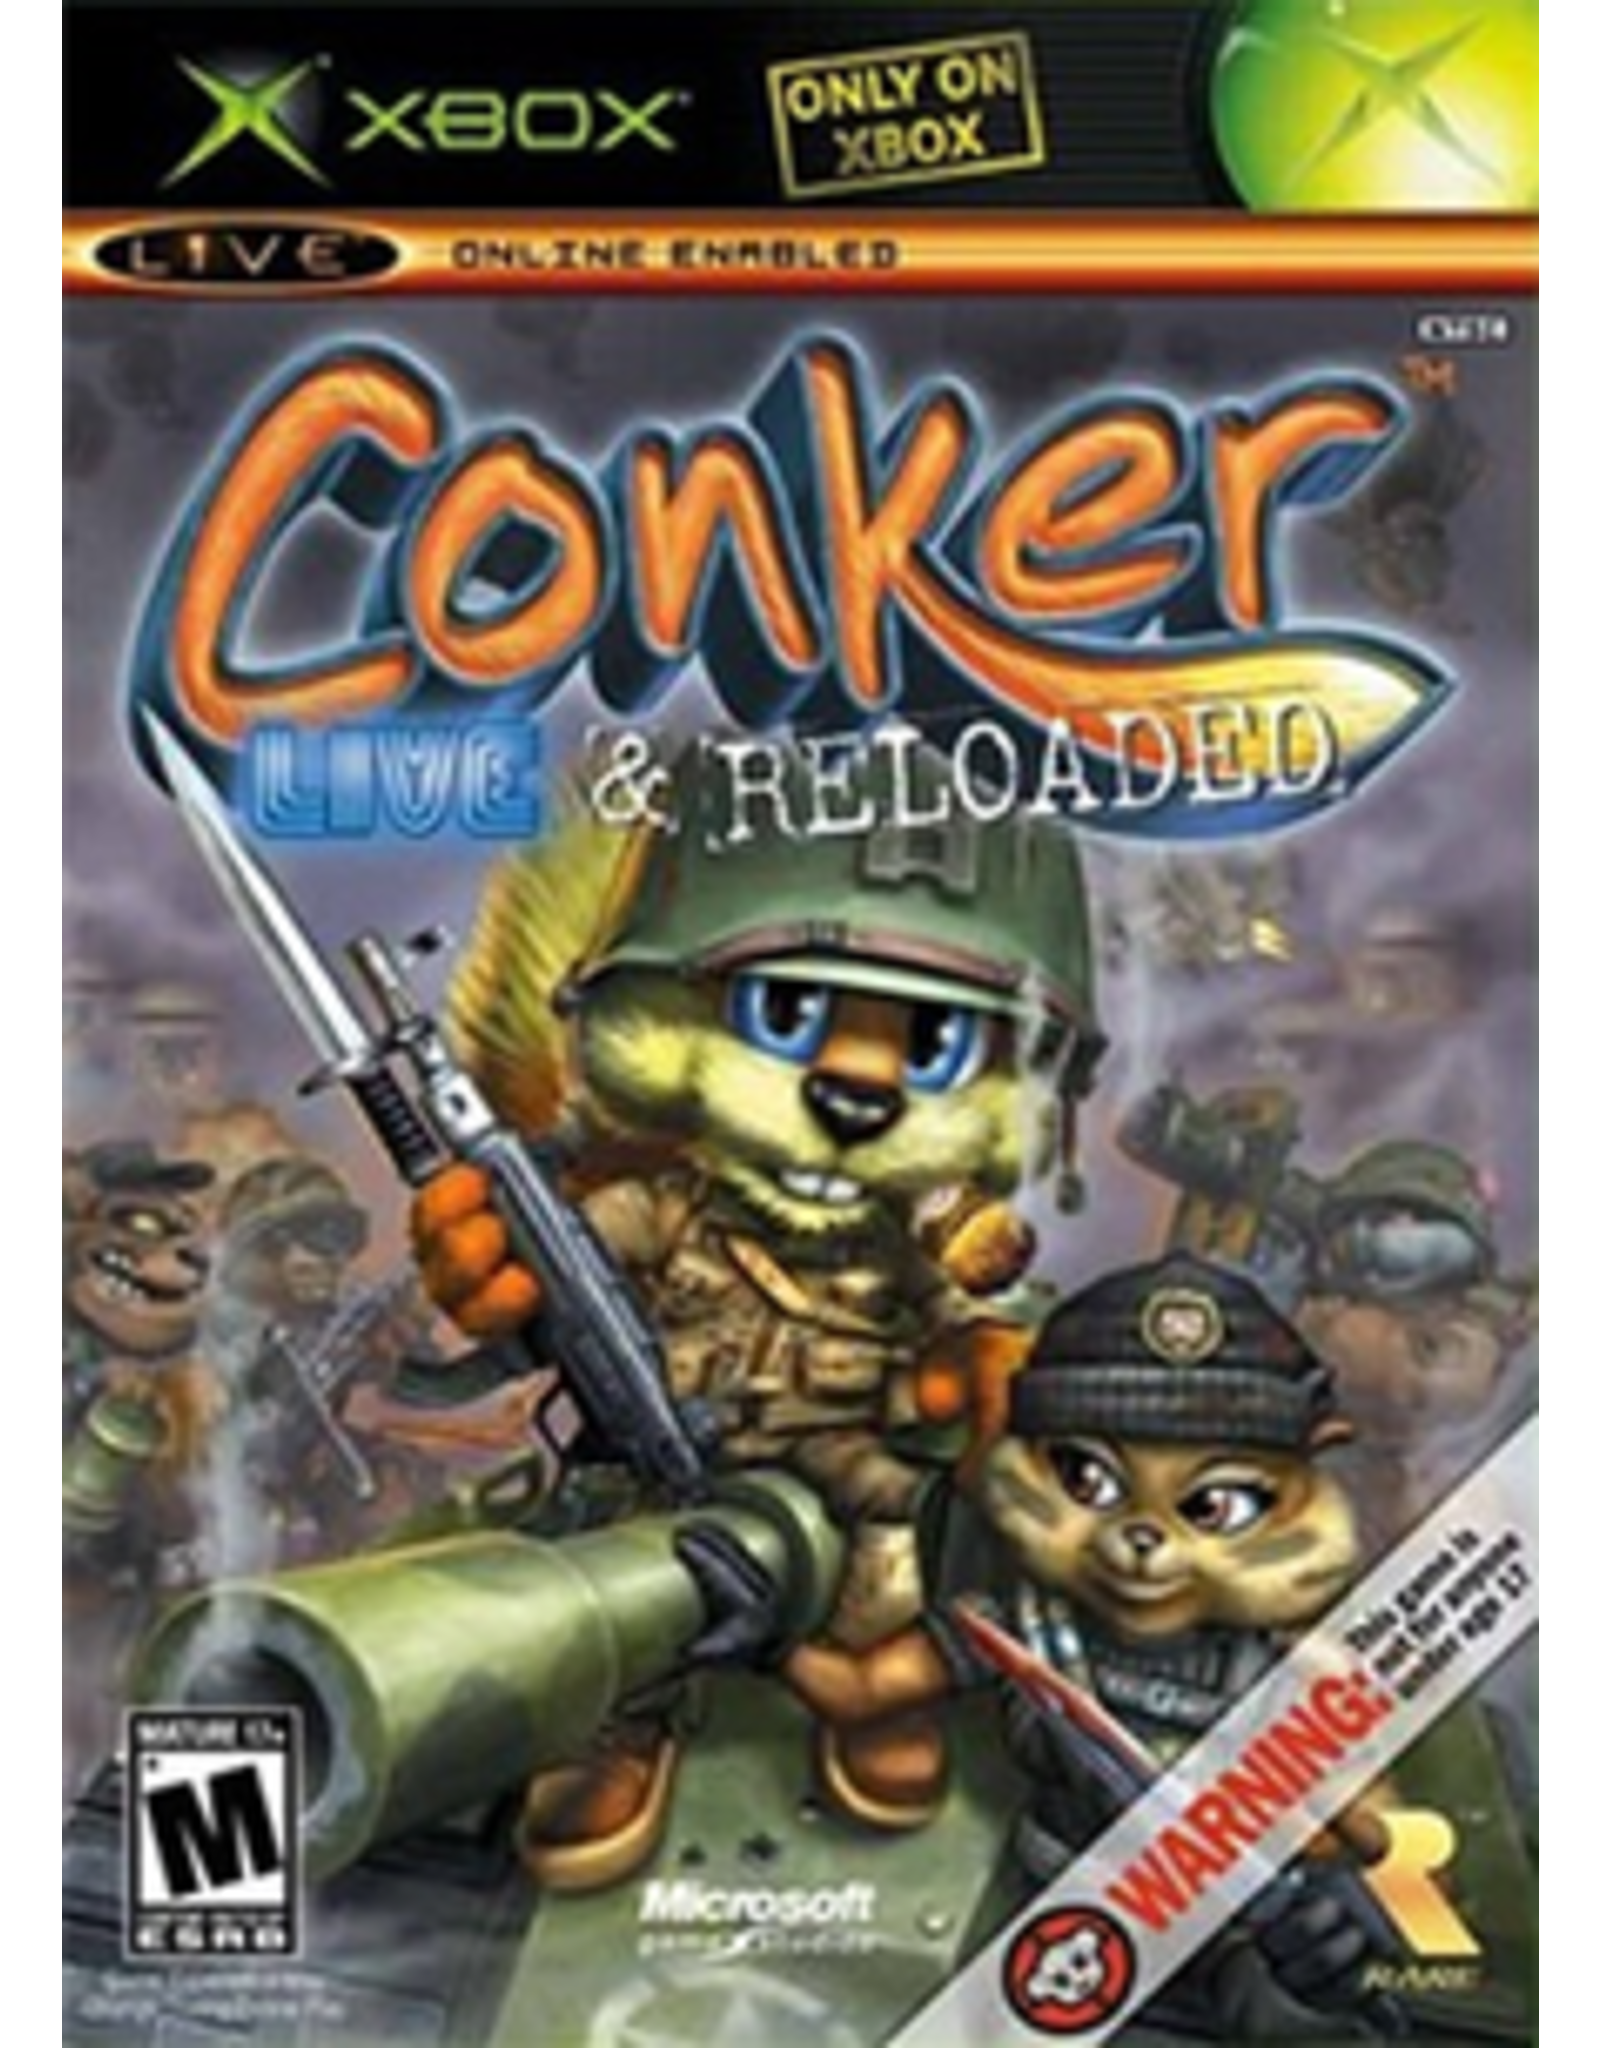 Xbox Conker Live and Reloaded (CiB, Sticker on Manual)